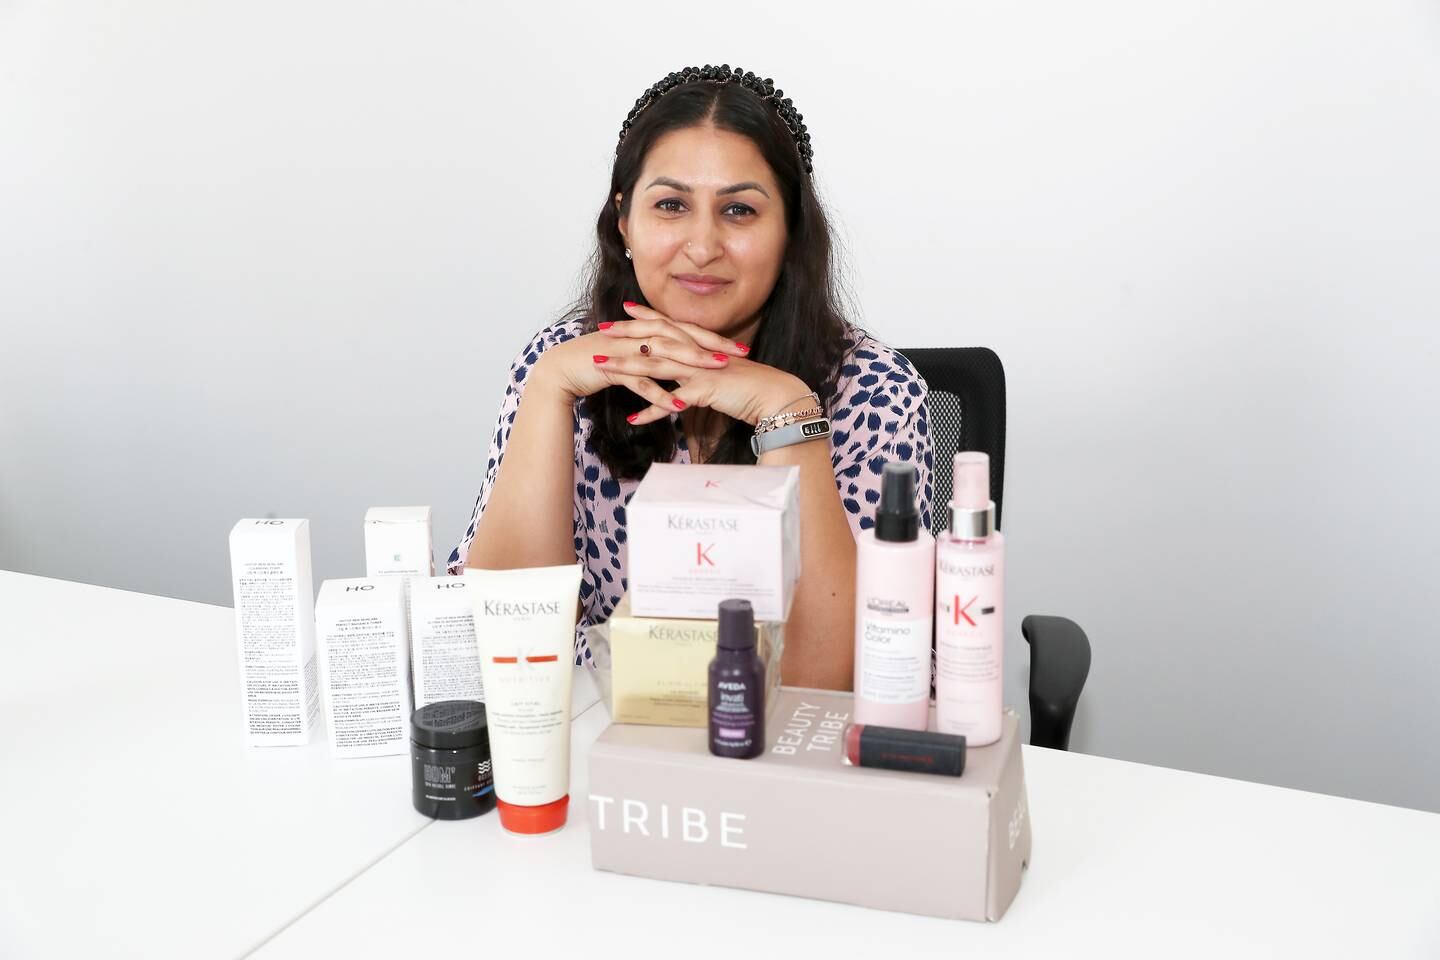 Nidhima Kohli says running a start-up is intense, so she rewards herself with meditation and massages. Pawan Singh / The National 